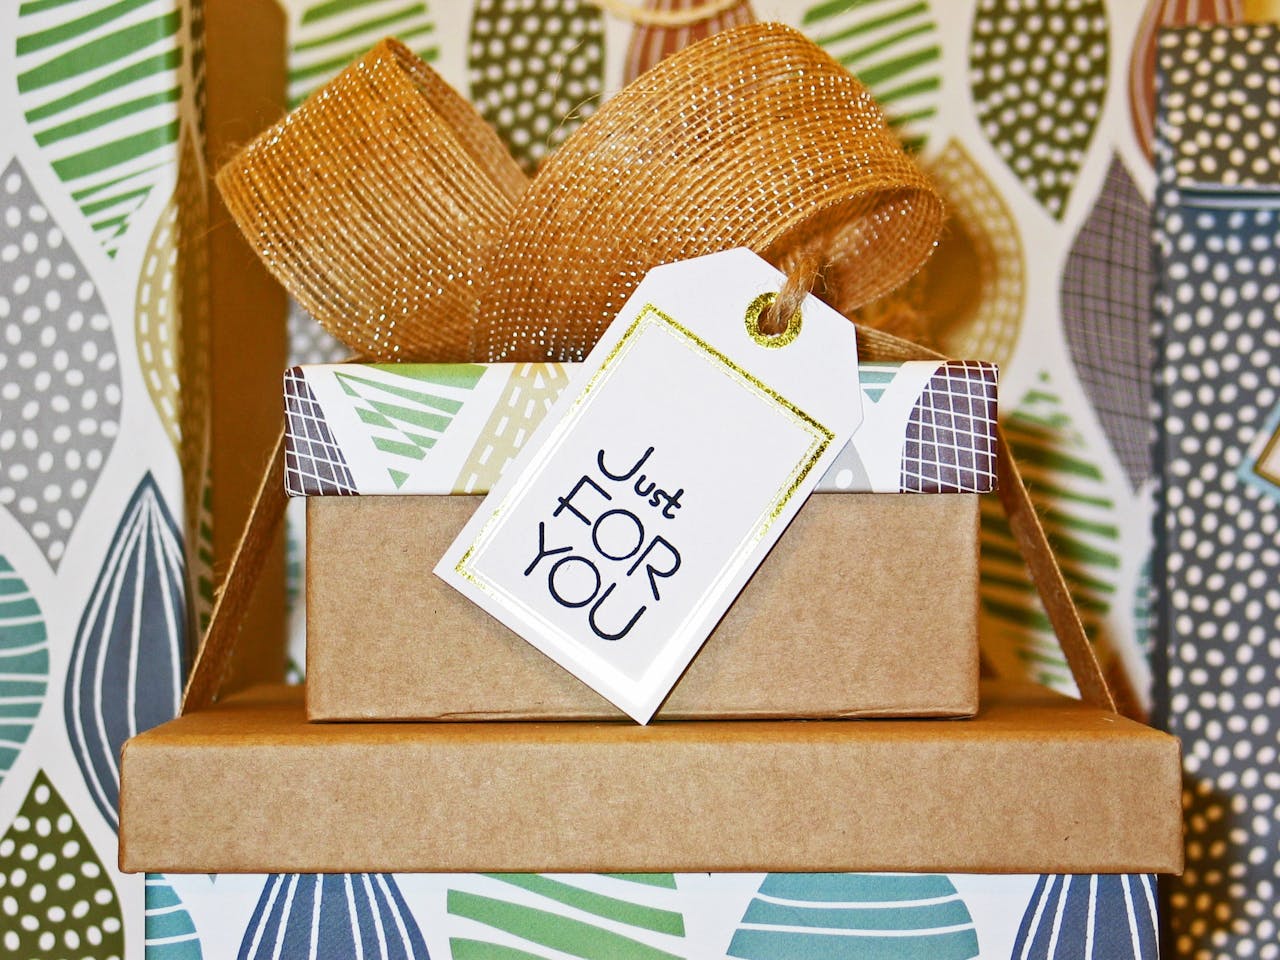 Why Should Small Businesses Invest In Packaging?